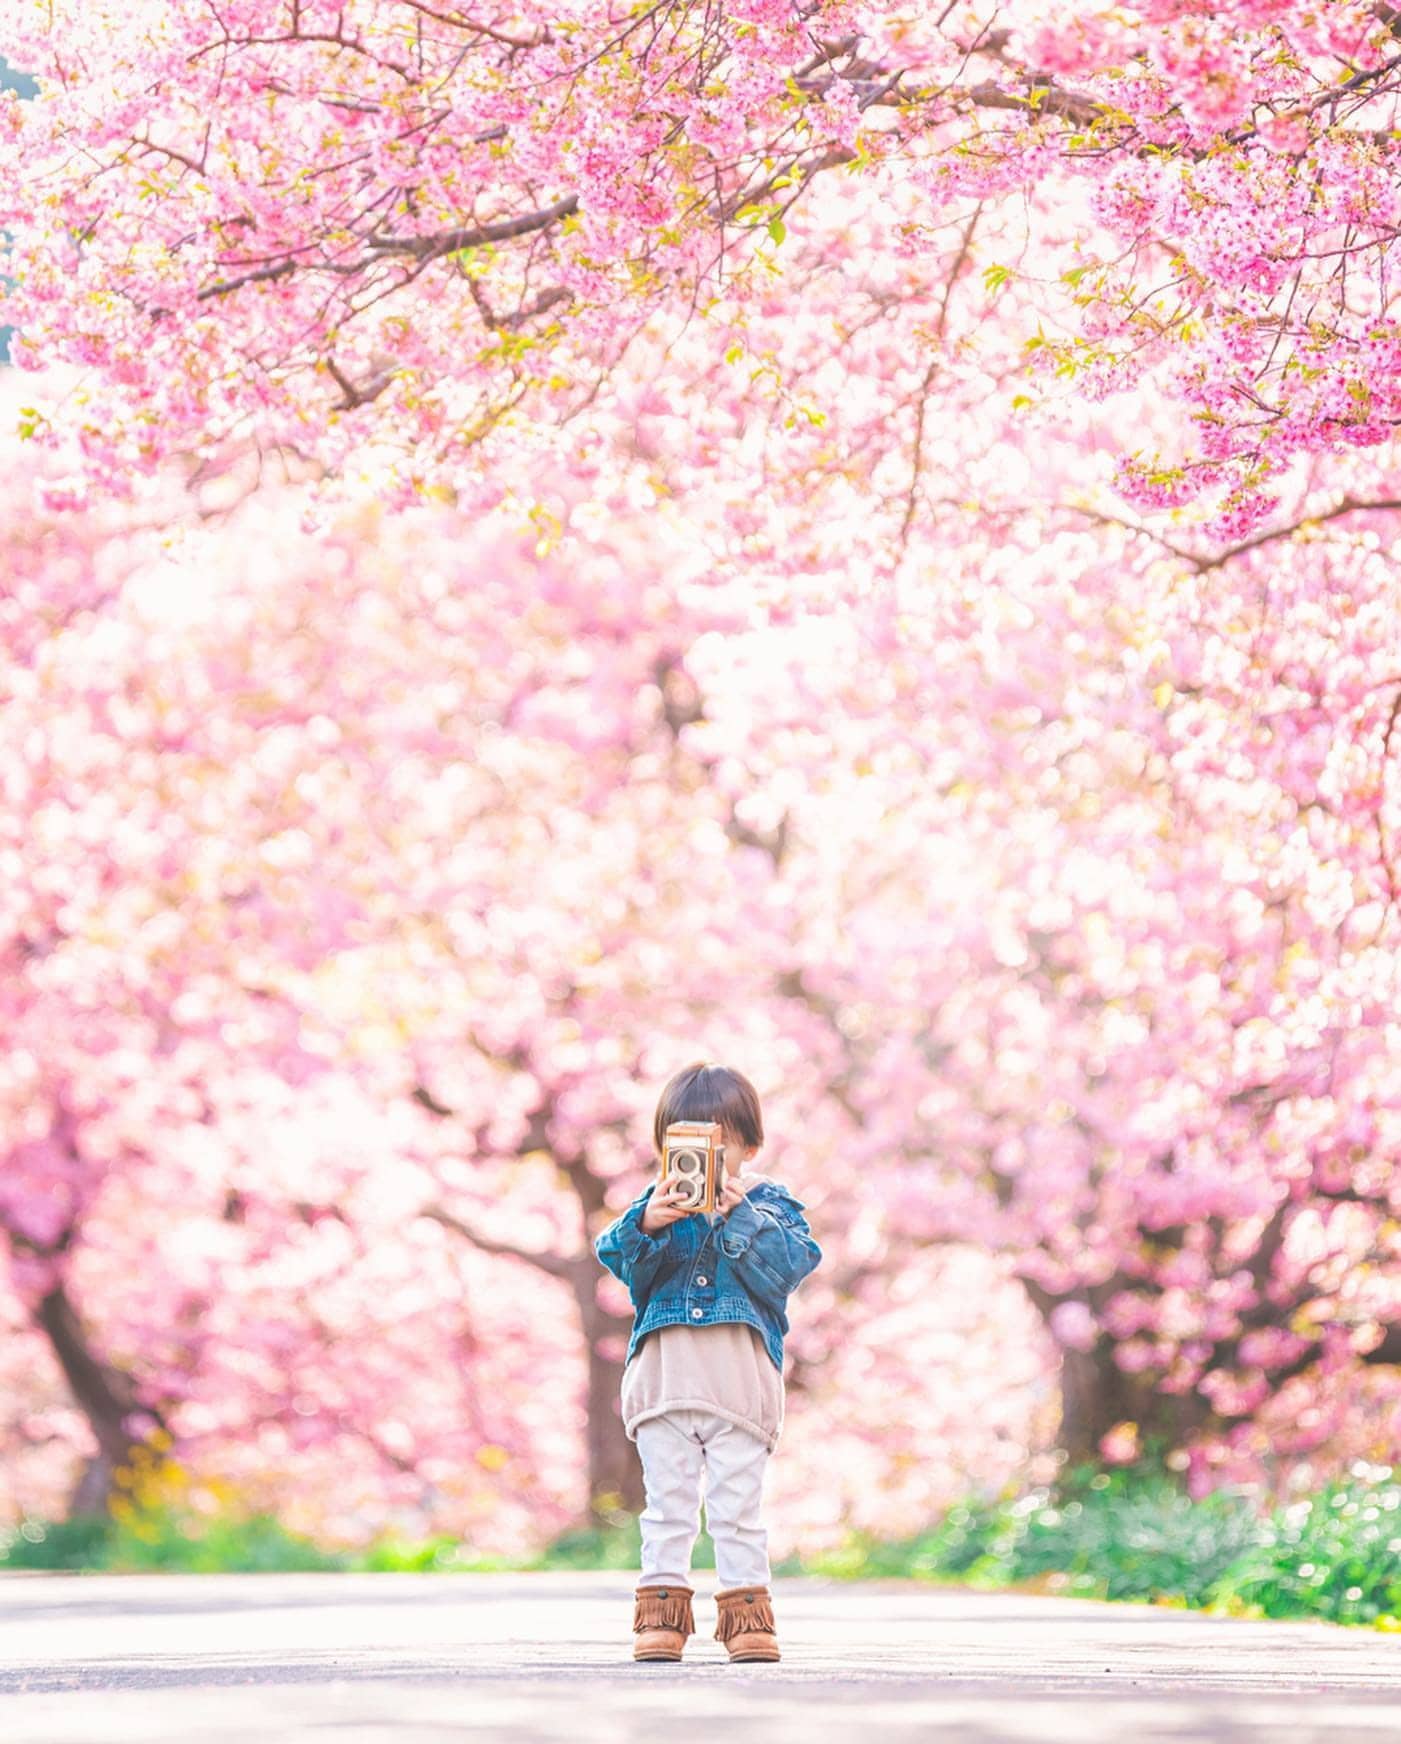 Child with Camera in Front of Cherry Blossoms